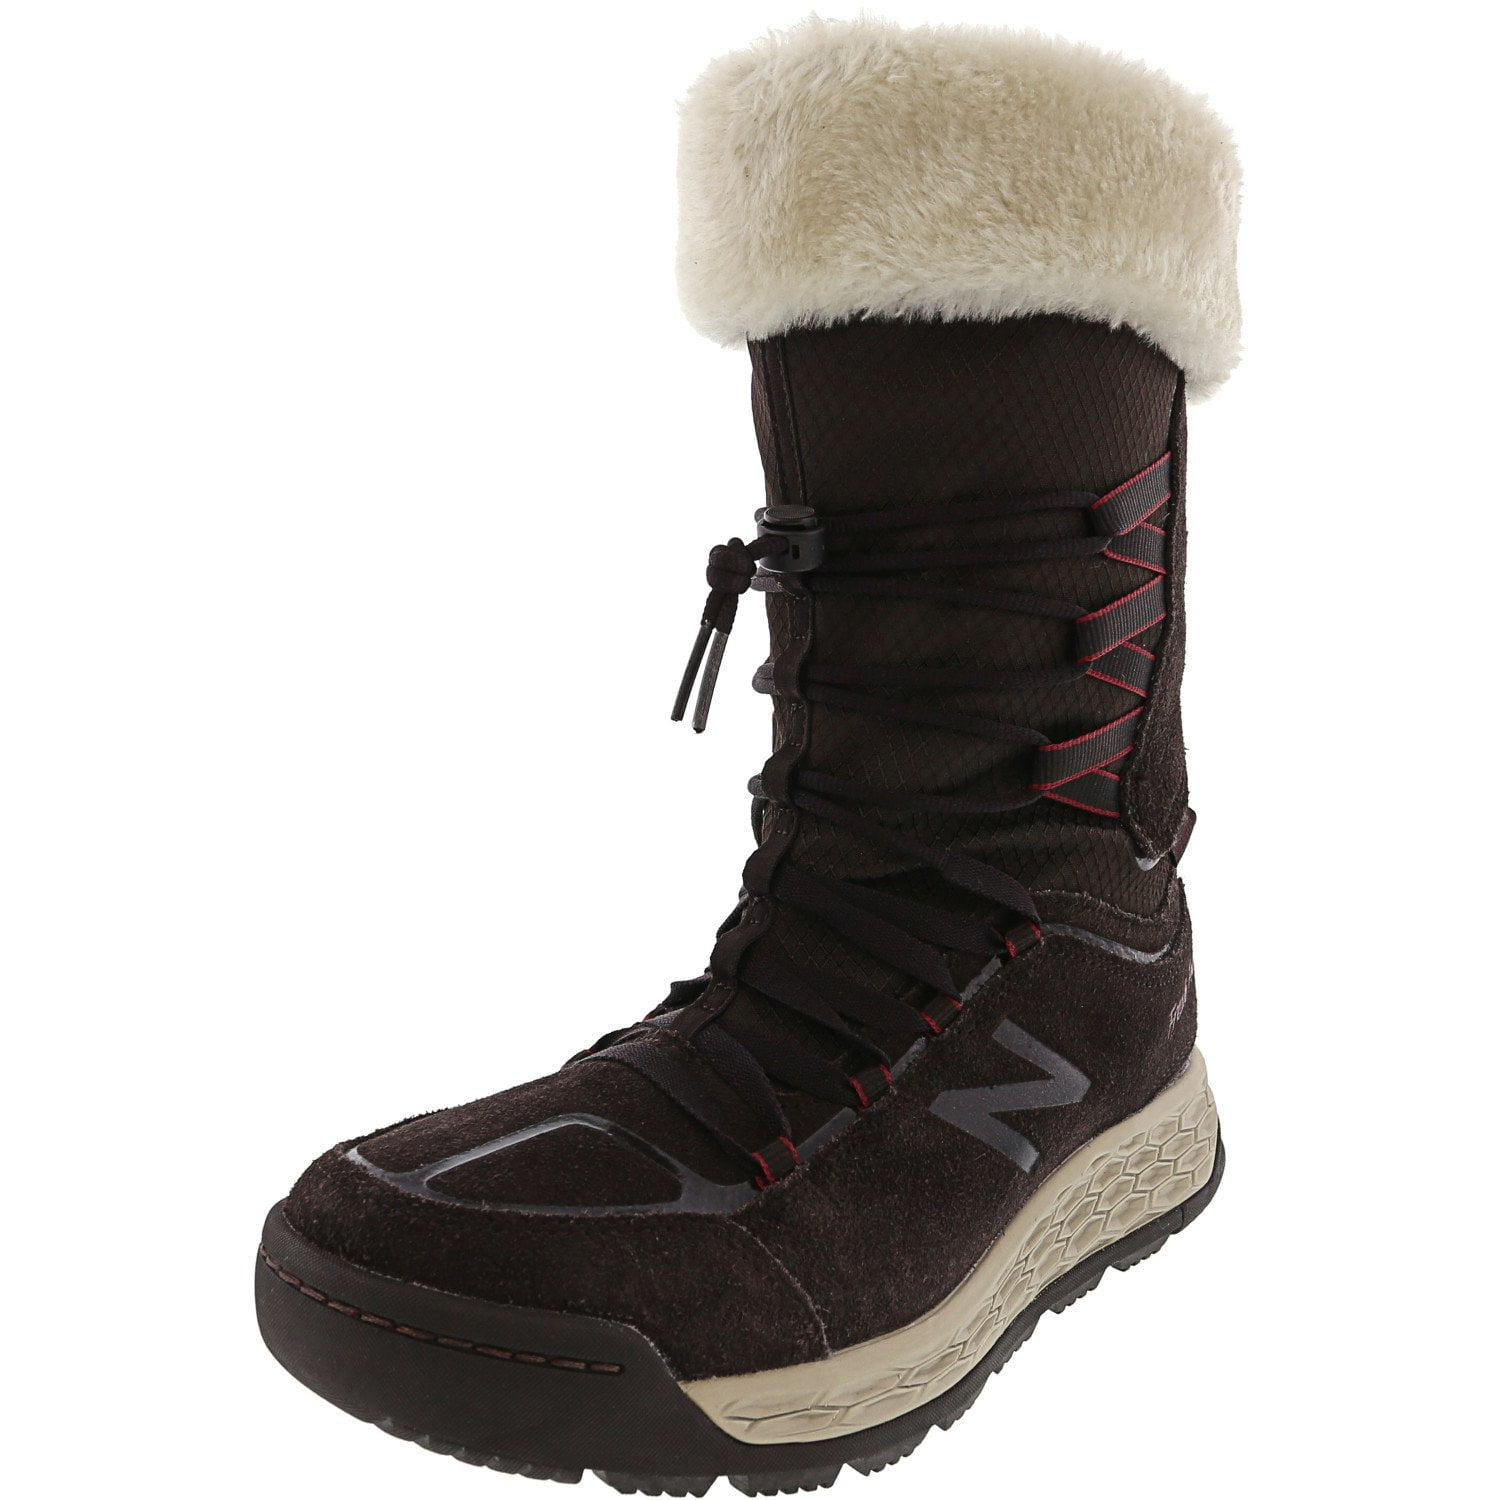 Bw1000 Br Knee-High Suede Boot - 7.5 